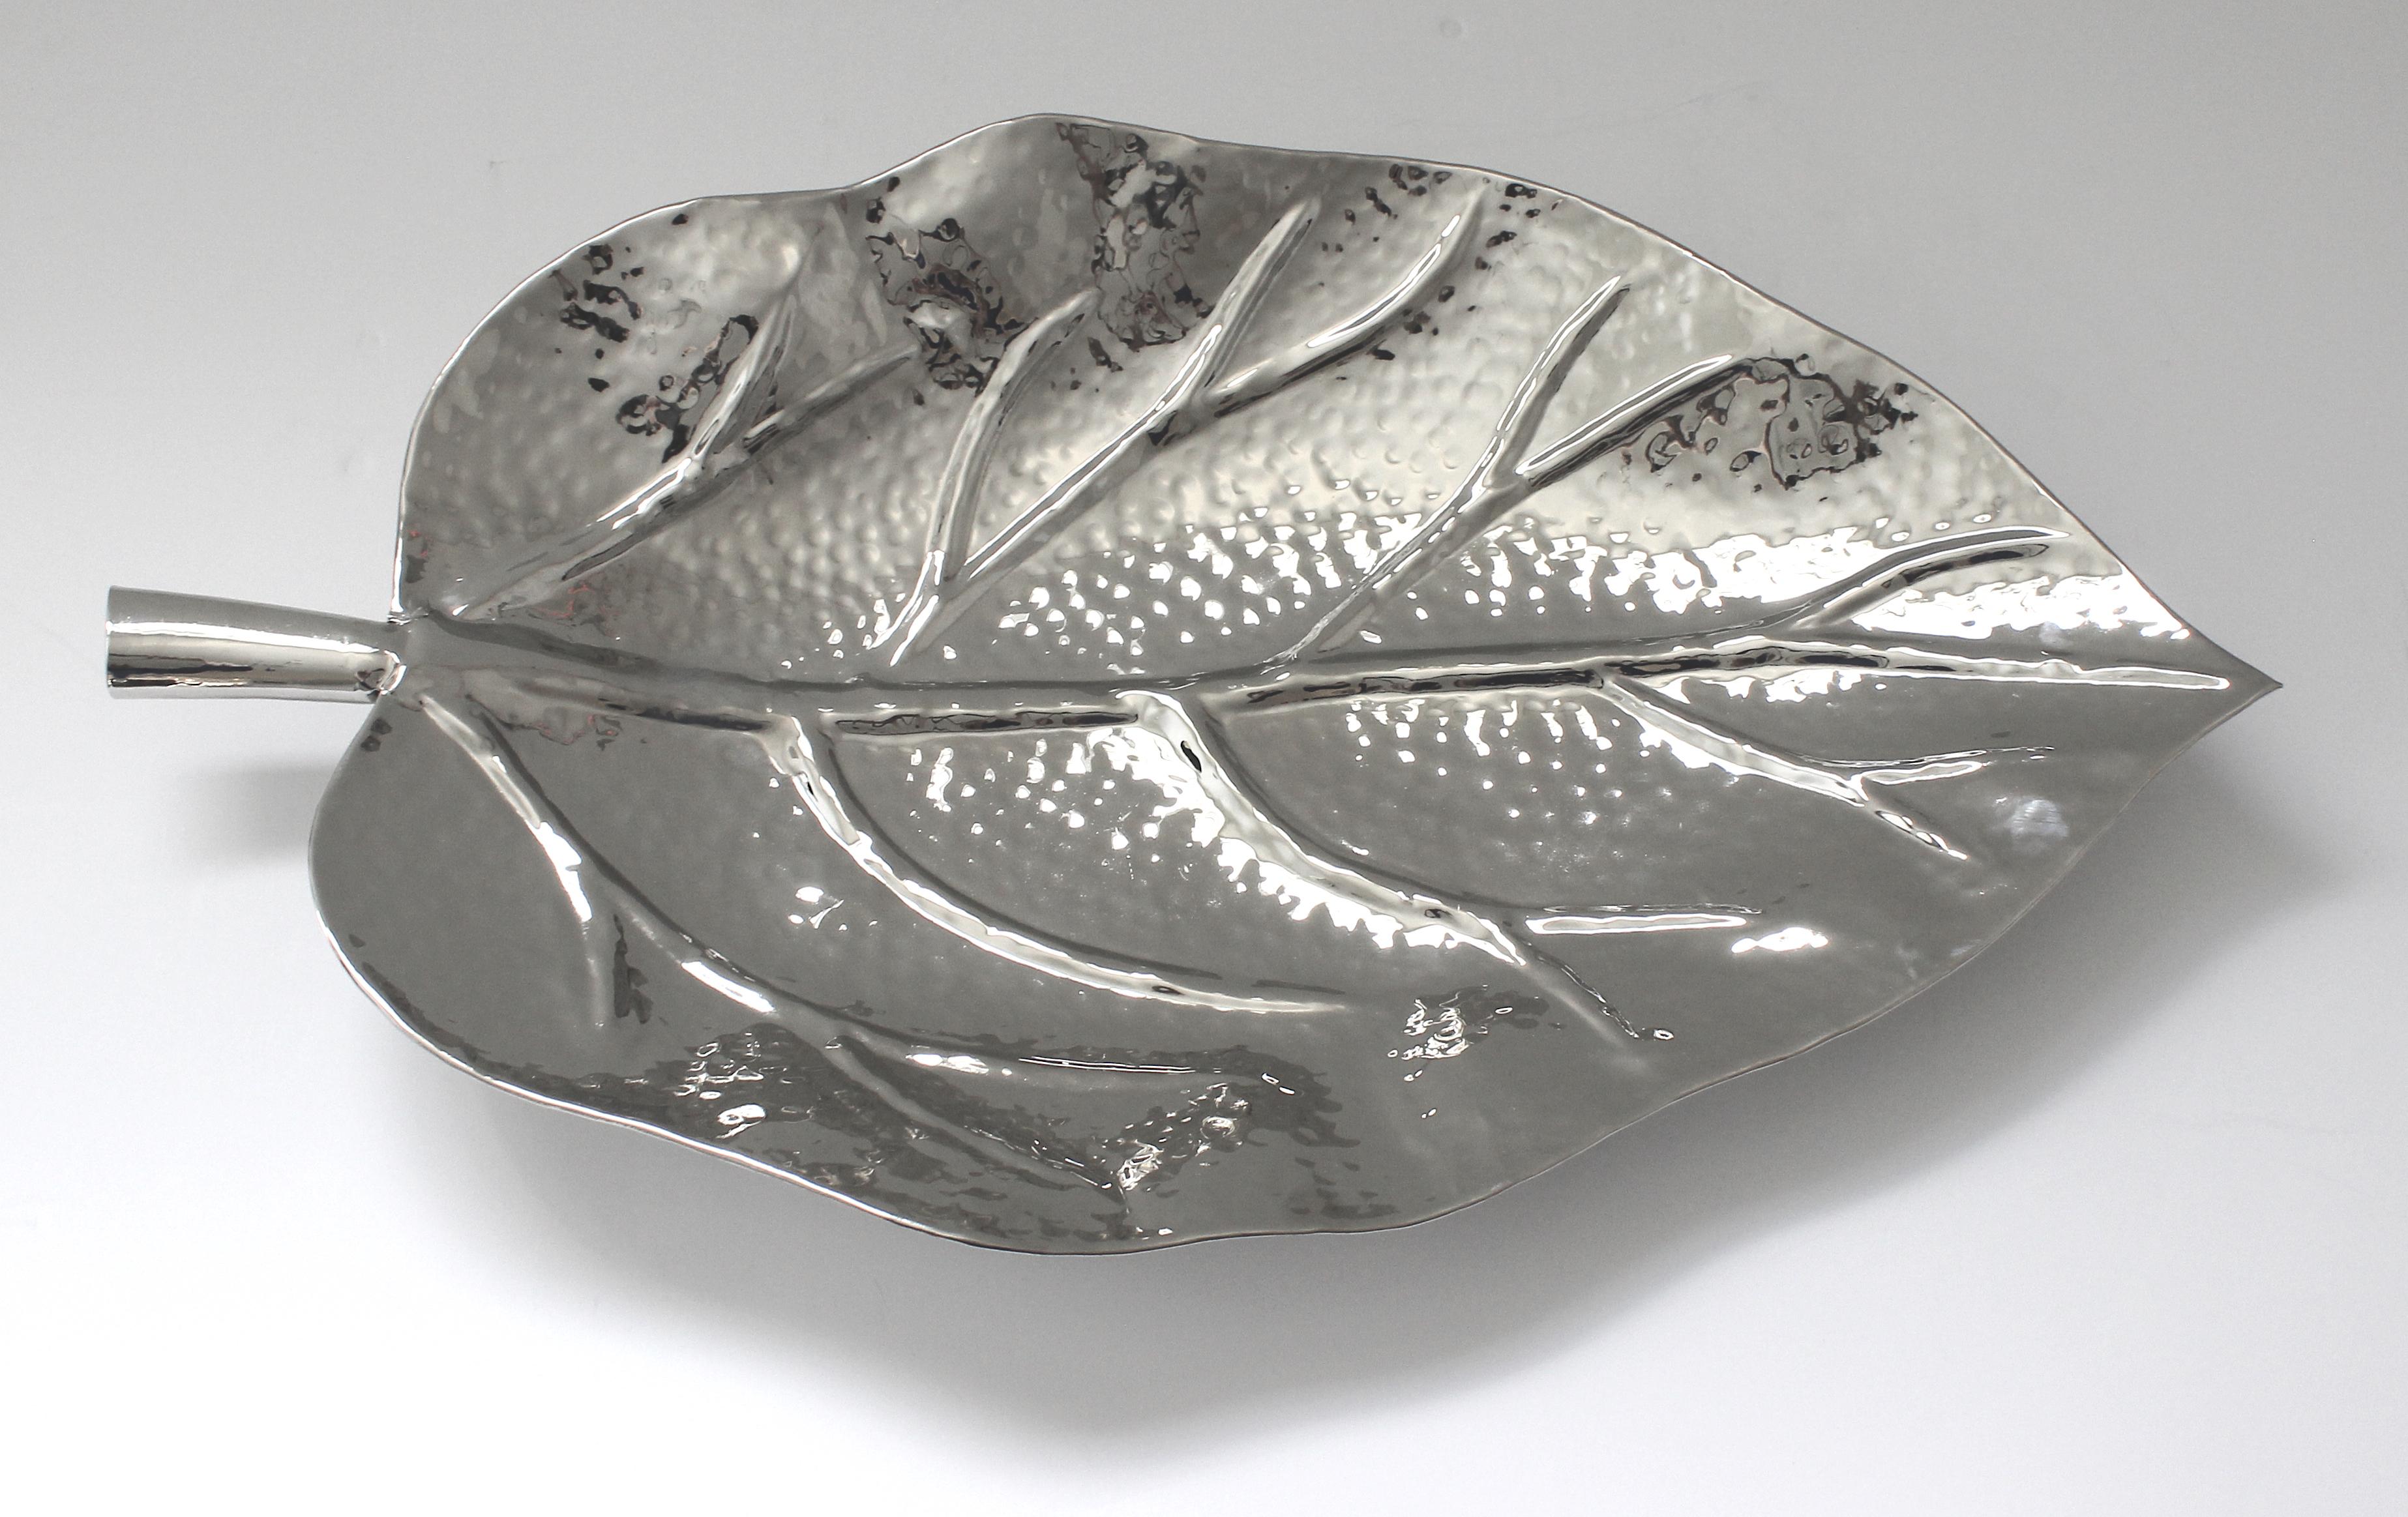 Nickel Plated Leaf Form Serving Tray by Iconic Snob Galeries In Good Condition For Sale In West Palm Beach, FL